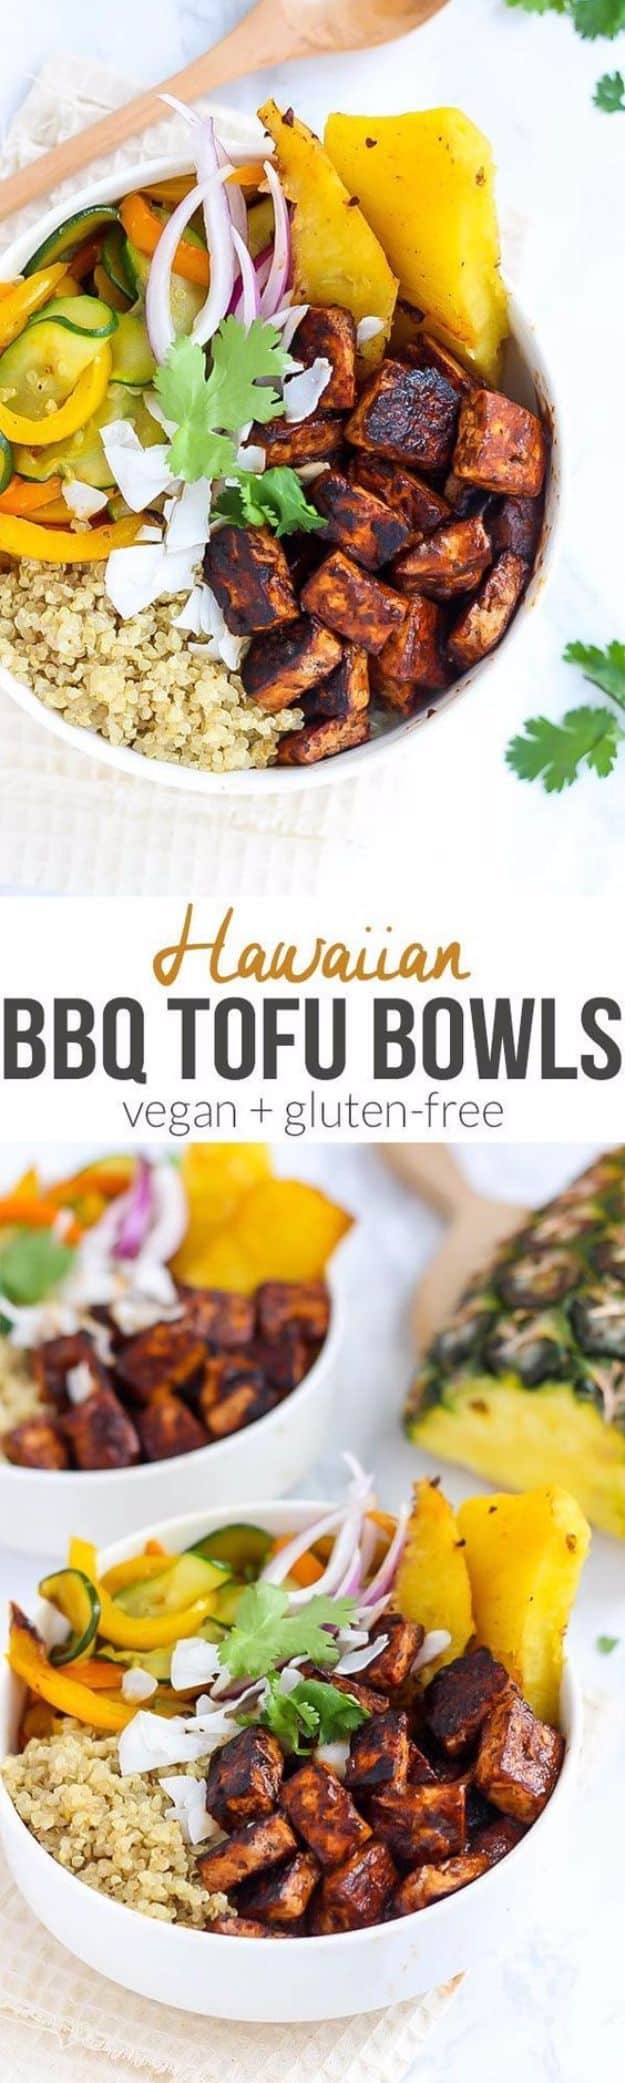 Best Barbecue Recipes - Hawaiian BBQ Tofu Bowls - Easy BBQ Recipe Ideas for Lunch, Dinner and Quick Party Appetizers - Grilled and Smoked Foods, Chicken, Beef and Meat, Fish and Vegetable Ideas for Grilling - Sauces and Rubs, Seasonings and Favorite Bar BBQ Tips #bbq #bbqrecipes #grilling